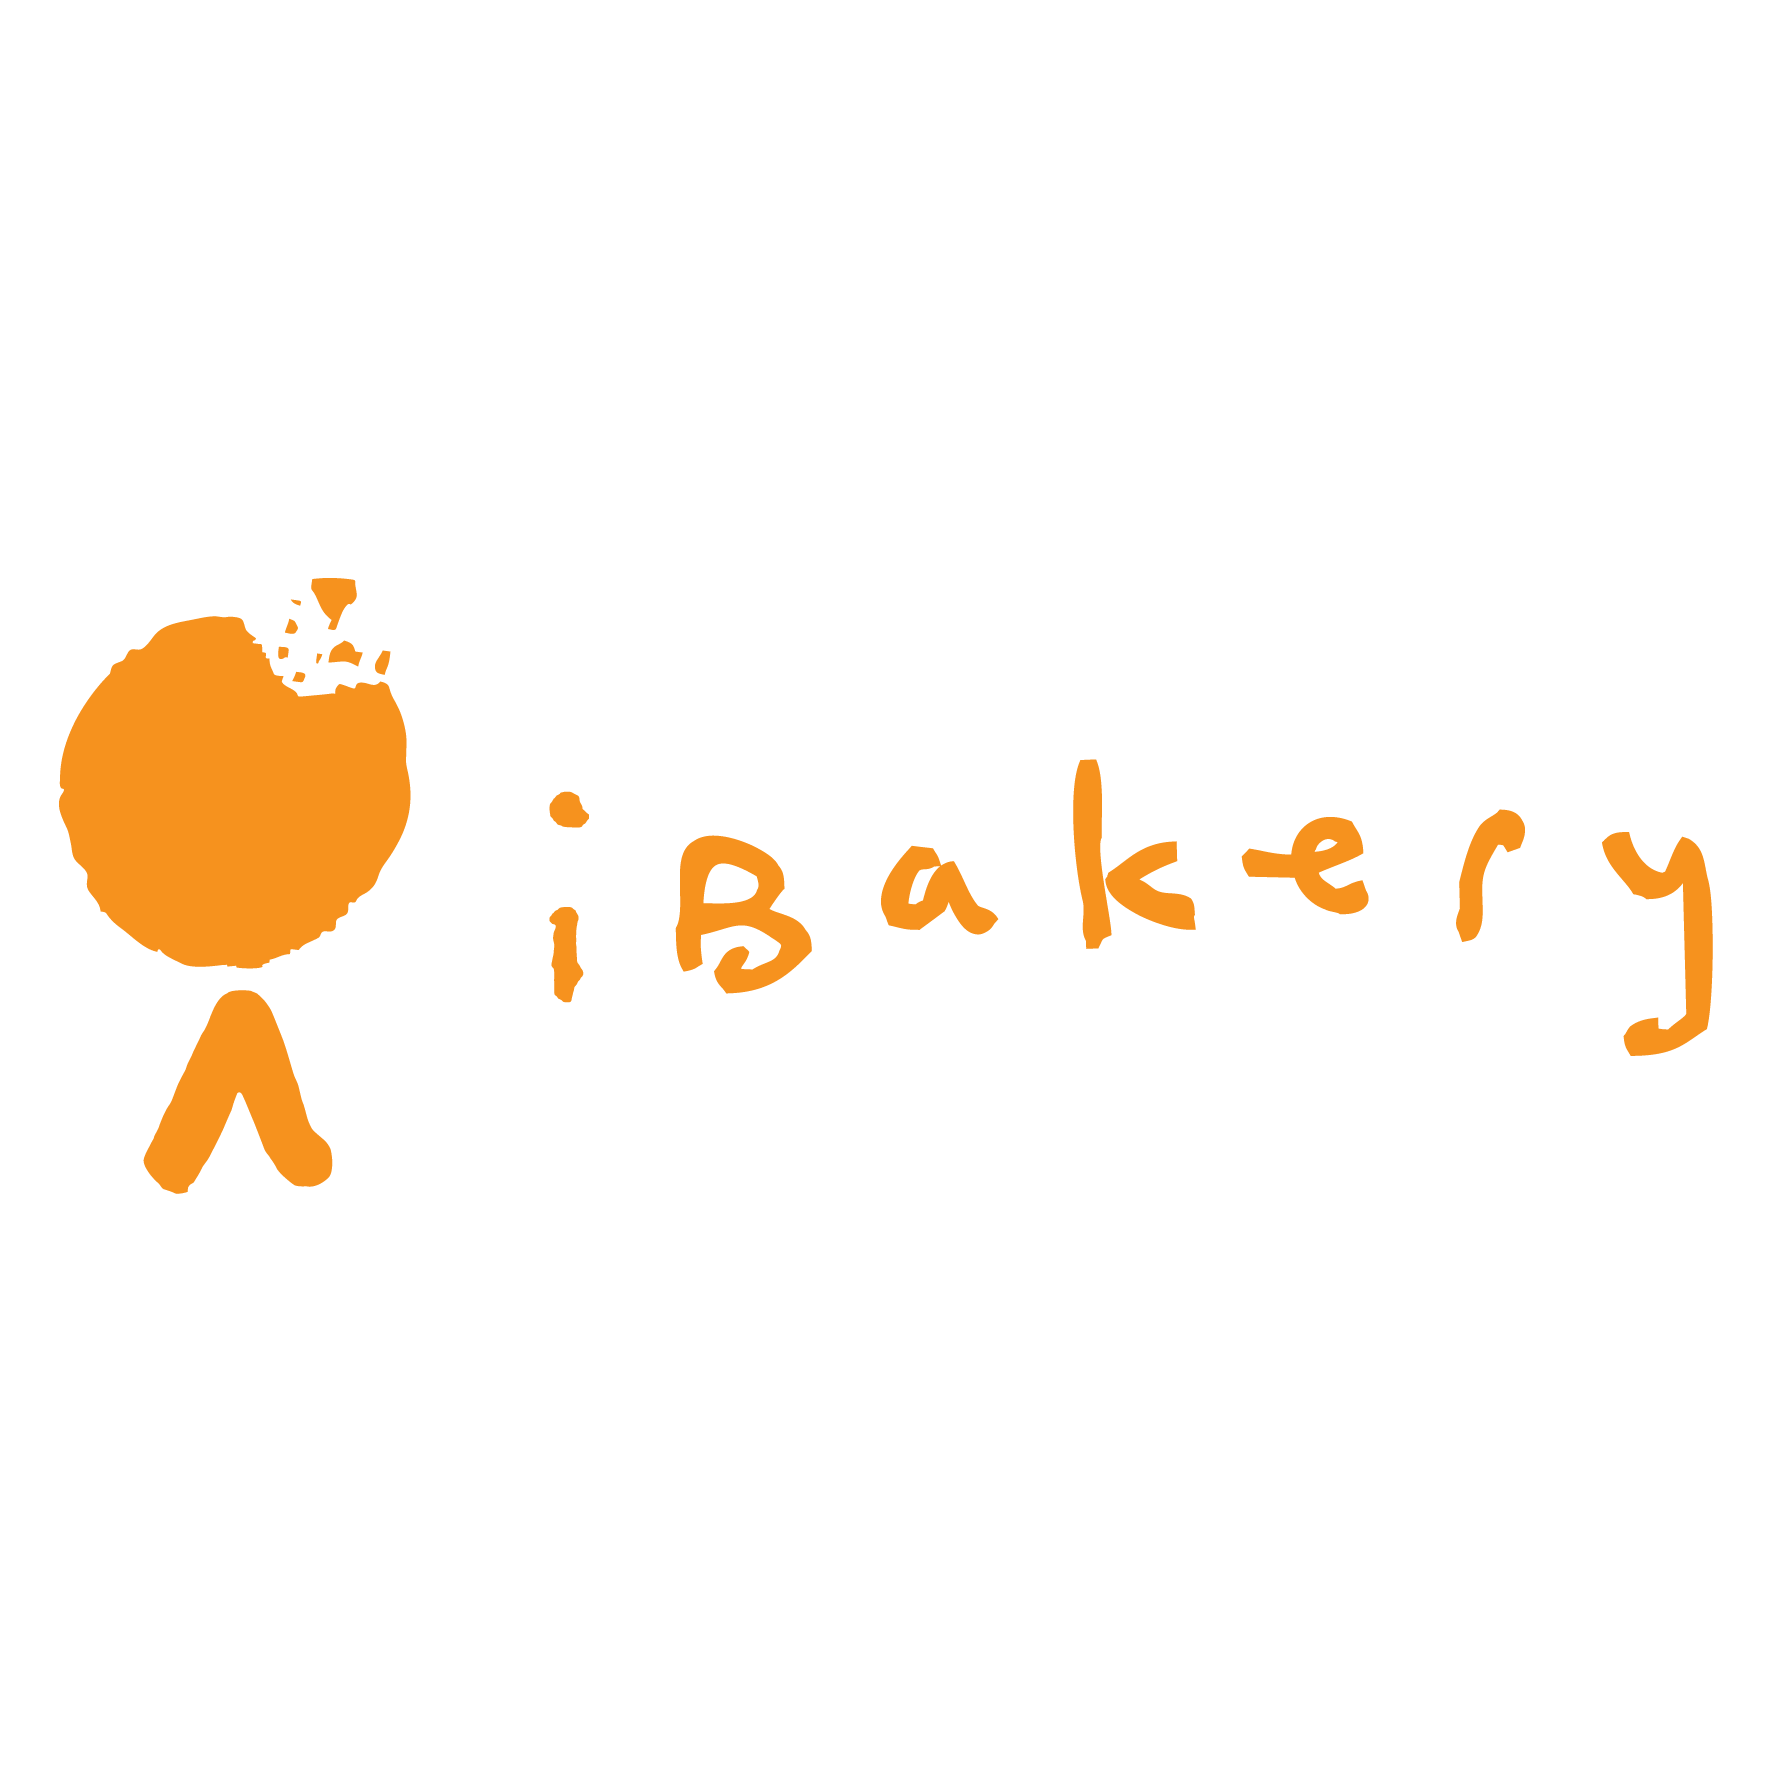 Ibakery.png